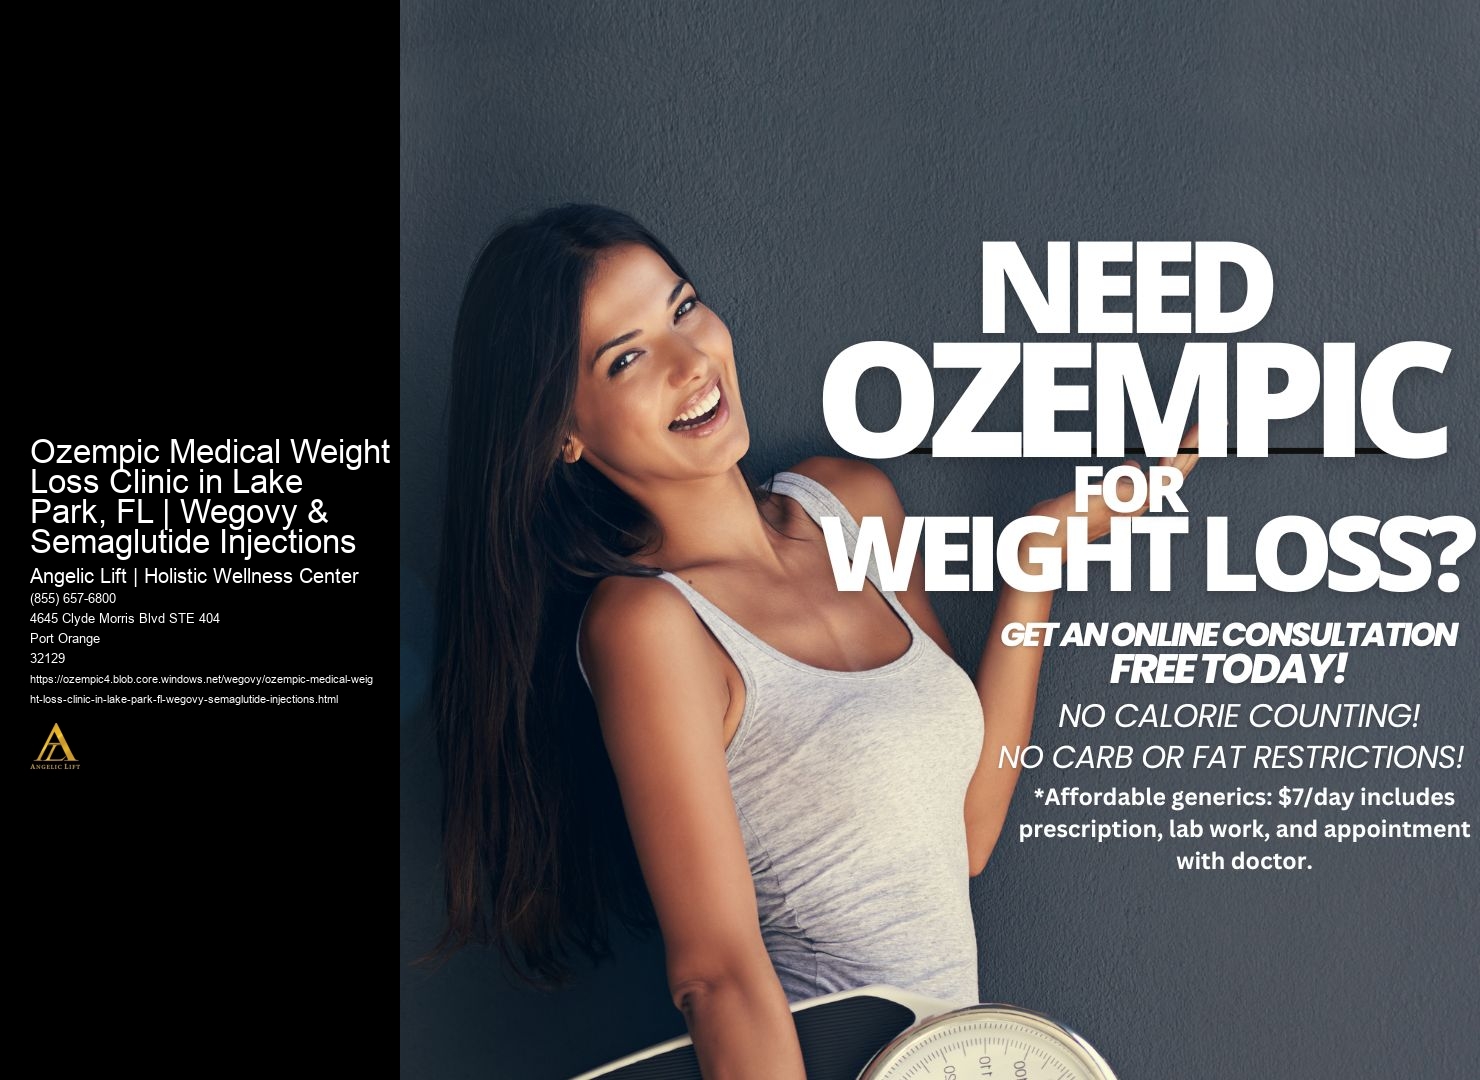 Ozempic Medical Weight Loss Clinic in Lake Park, FL | Wegovy & Semaglutide Injections